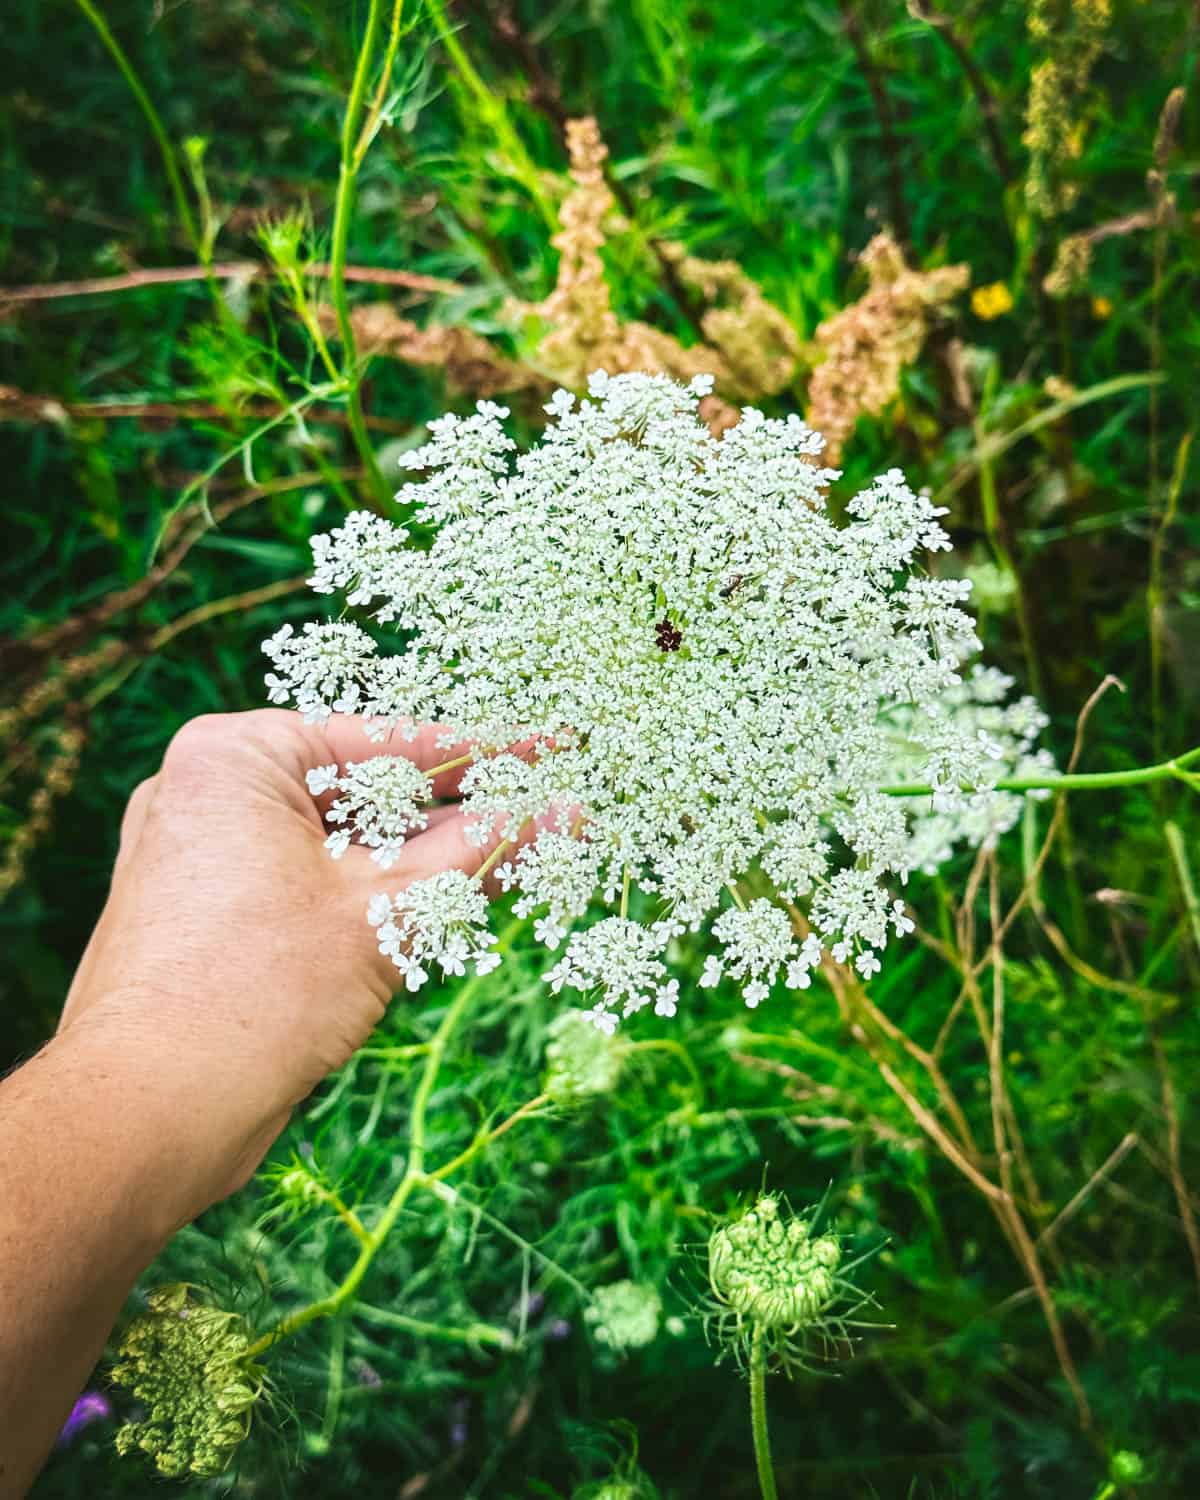 A hand holding a Queen Anne's lace flower.